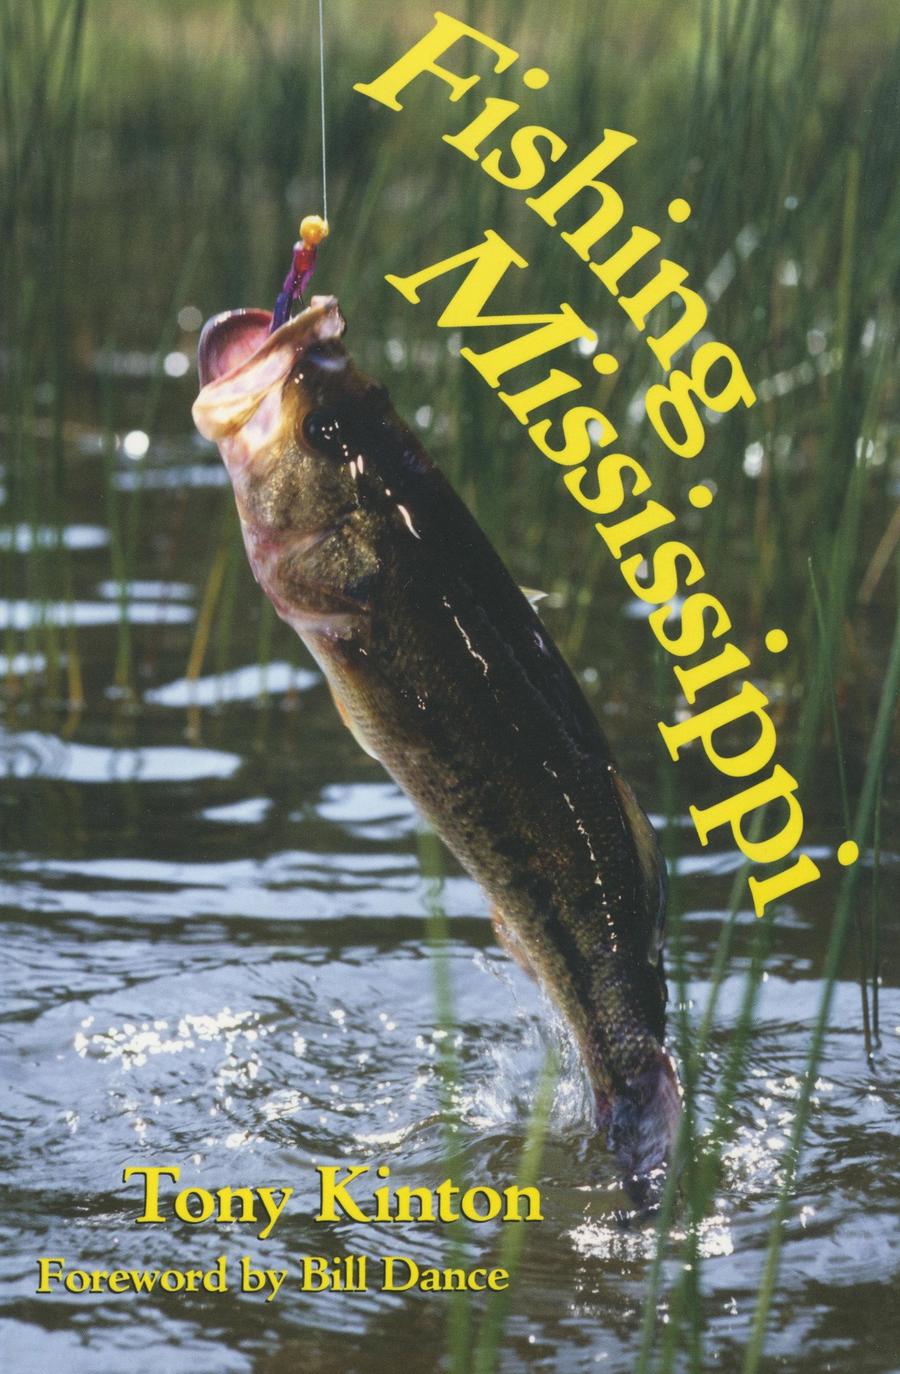 https://www.upress.state.ms.us/var/site/storage/images/books/f/fishing-mississippi/image-front-cover/746284-1-eng-CA/Image-front-cover_rb_modalcover.jpg